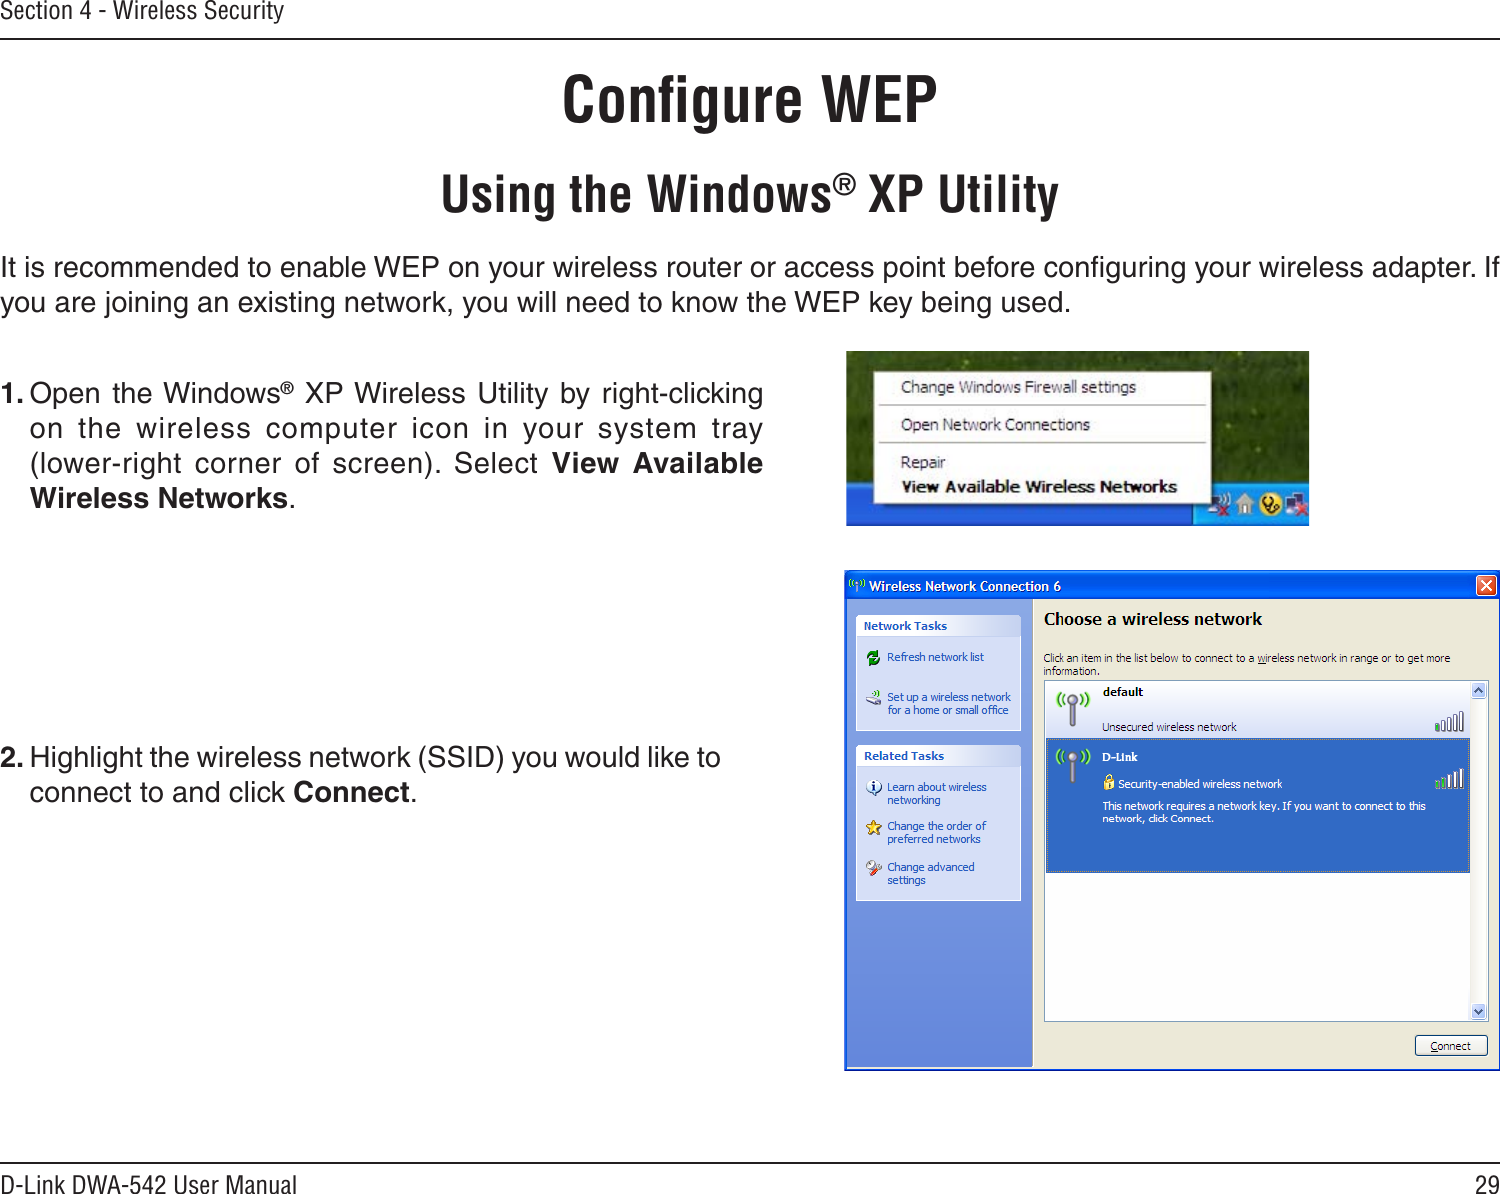 29D-Link DWA-542 User ManualSection 4 - Wireless SecurityConﬁgure WEPUsing the Windows® XP UtilityIt is recommended to enable WEP on your wireless router or access point before conﬁguring your wireless adapter. If you are joining an existing network, you will need to know the WEP key being used.2. Highlight the wireless network (SSID) you would like to connect to and click Connect.1. Open the Windows® XP Wireless Utility by  right-clicking on  the  wireless  computer  icon  in  your  system  tray  (lower-right  corner  of  screen).  Select  View  Available Wireless Networks. 